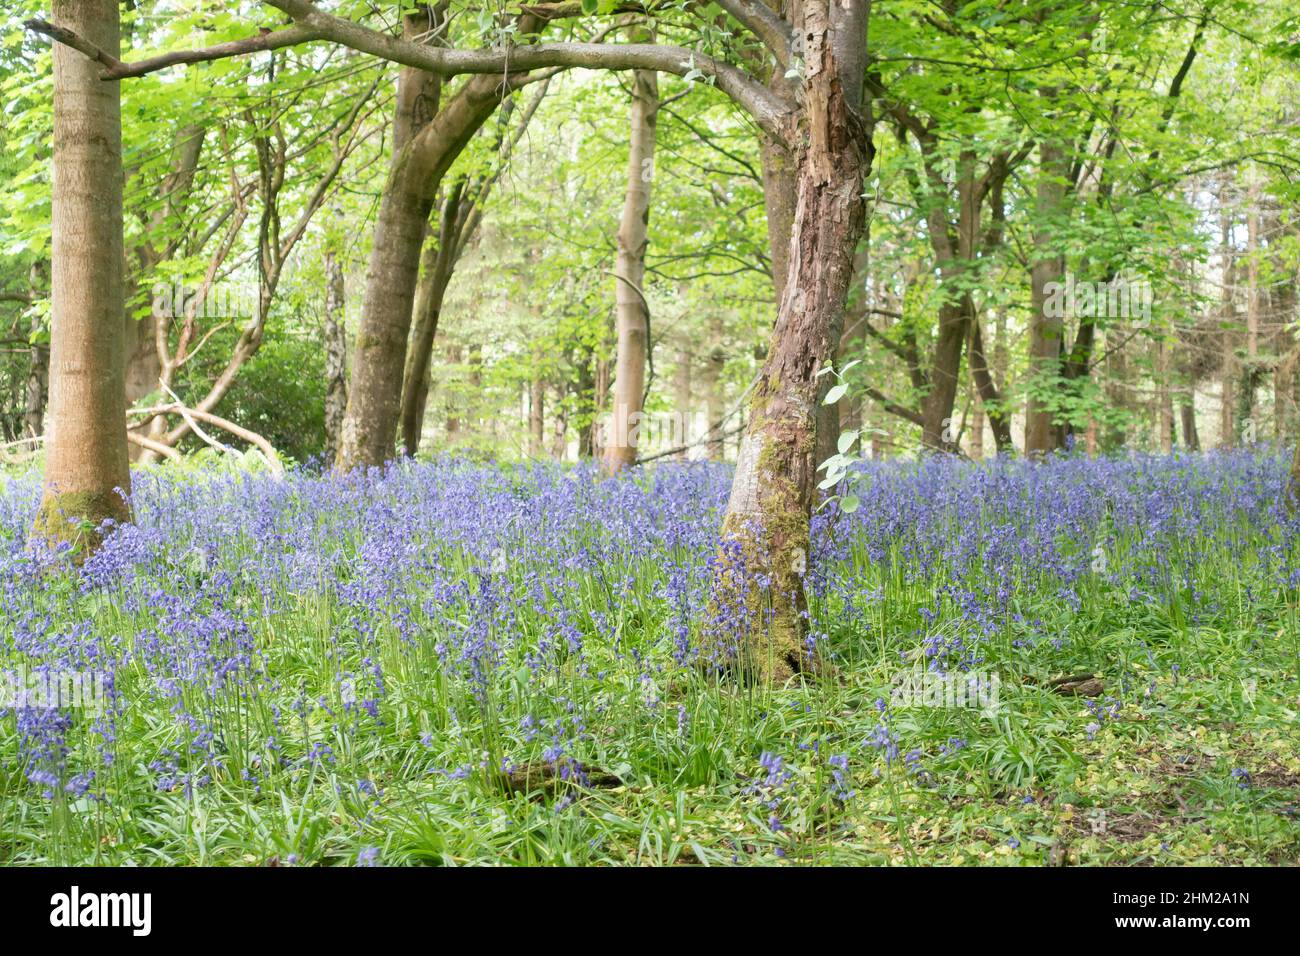 Bluebells growing in a Scottish woodland in May, Eglinton Country Park, North Ayrshire, Scotland. Stock Photo